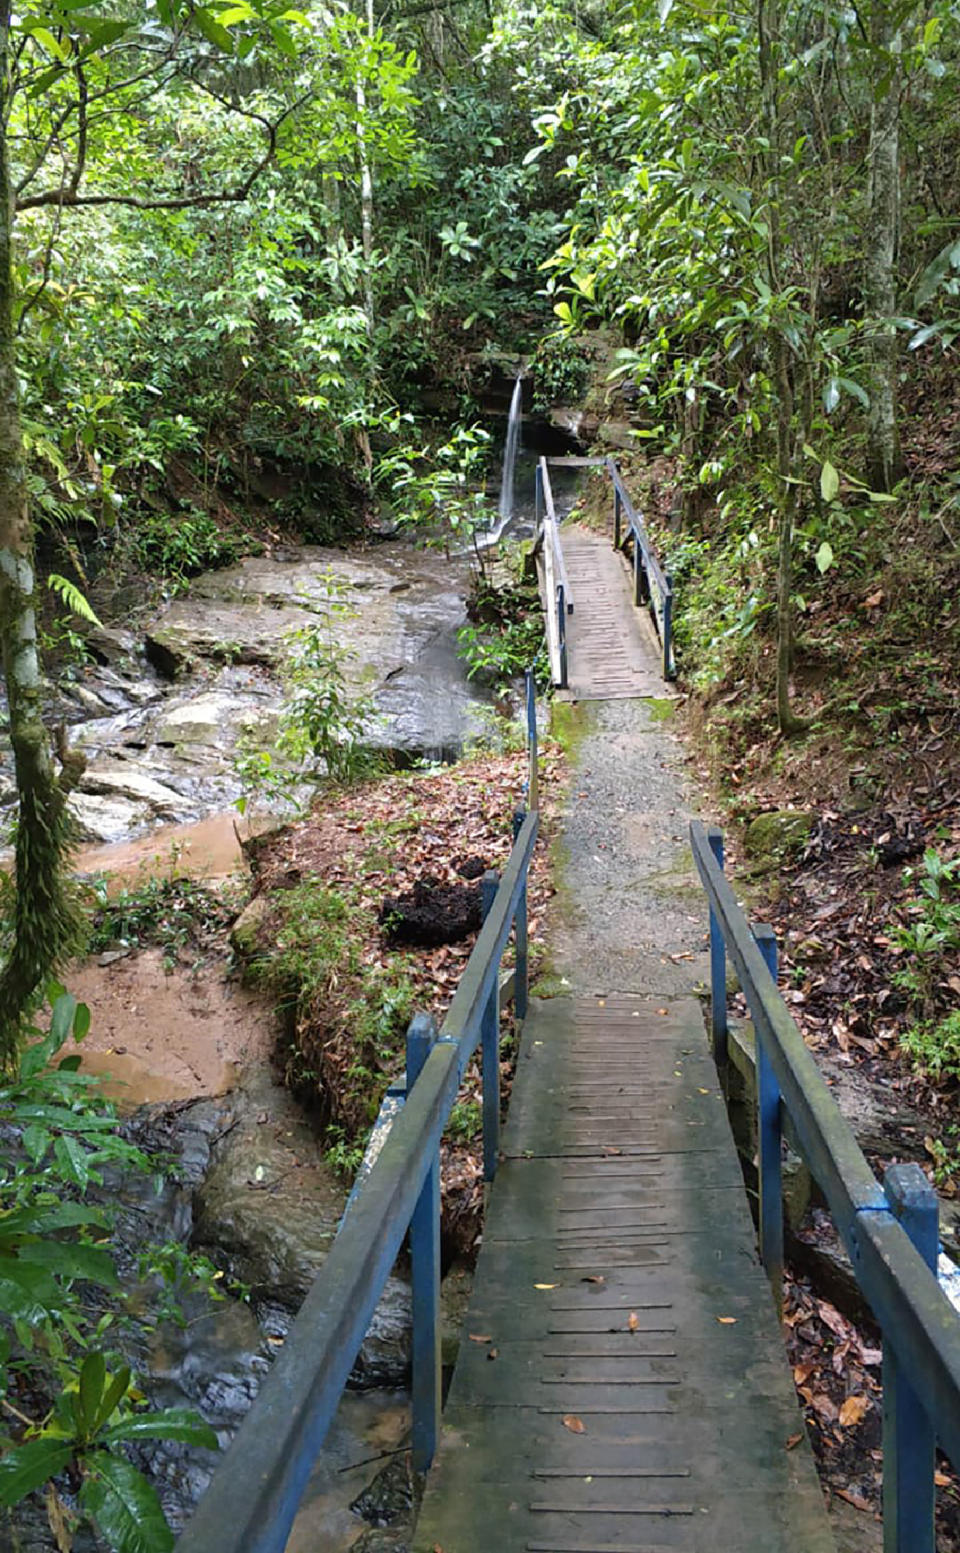 This undated Nov. 2020 photo released by Brazil's Goias state civil police shows a bridge leading to the site where police report they recovered the body of Japanese woman Hitomi Akamatsu in Abadiania, Brazil. Brazilian Civil Police arrested 18-year-old Rafael Lima da Costa who they say confessed to killing Akamatsu on Nov. 10 while robbing her. (Goias state civil police via AP)